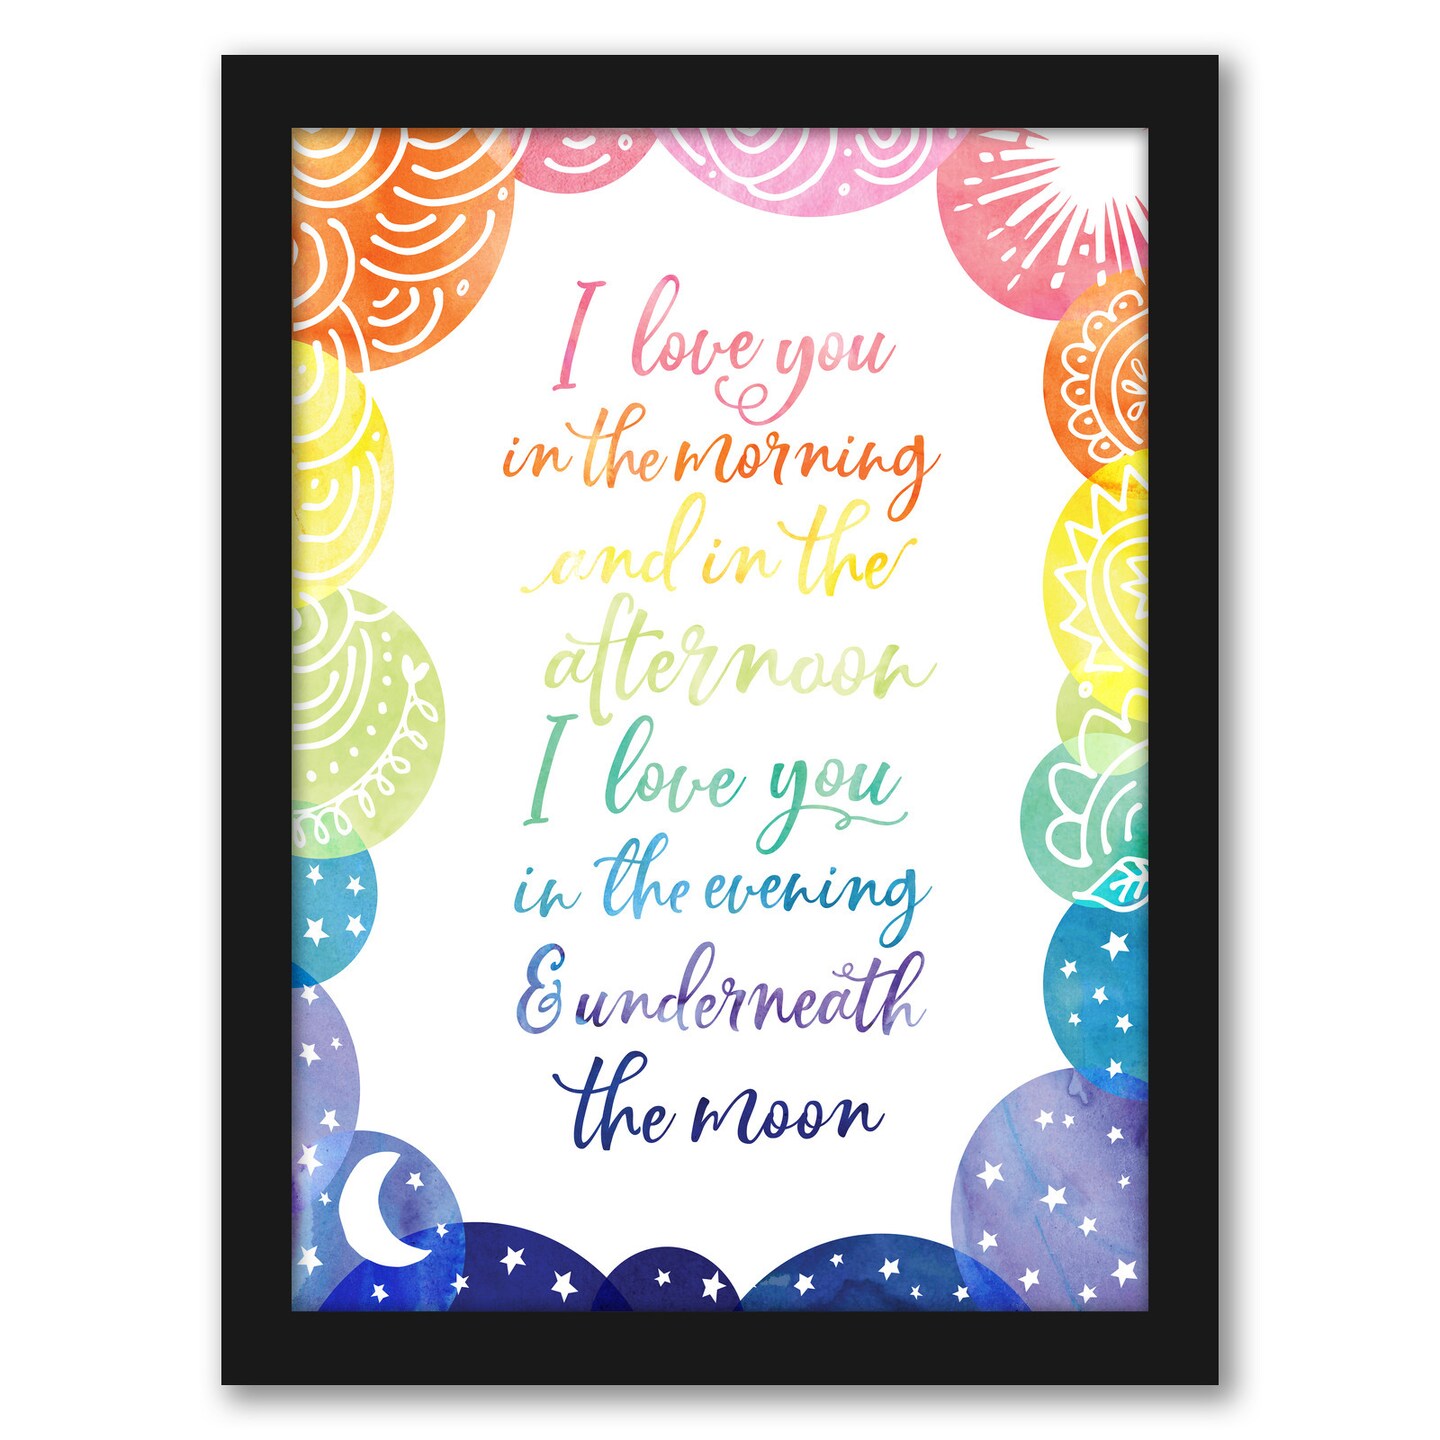 I Love You In The Morning by Elena David Frame  - Americanflat